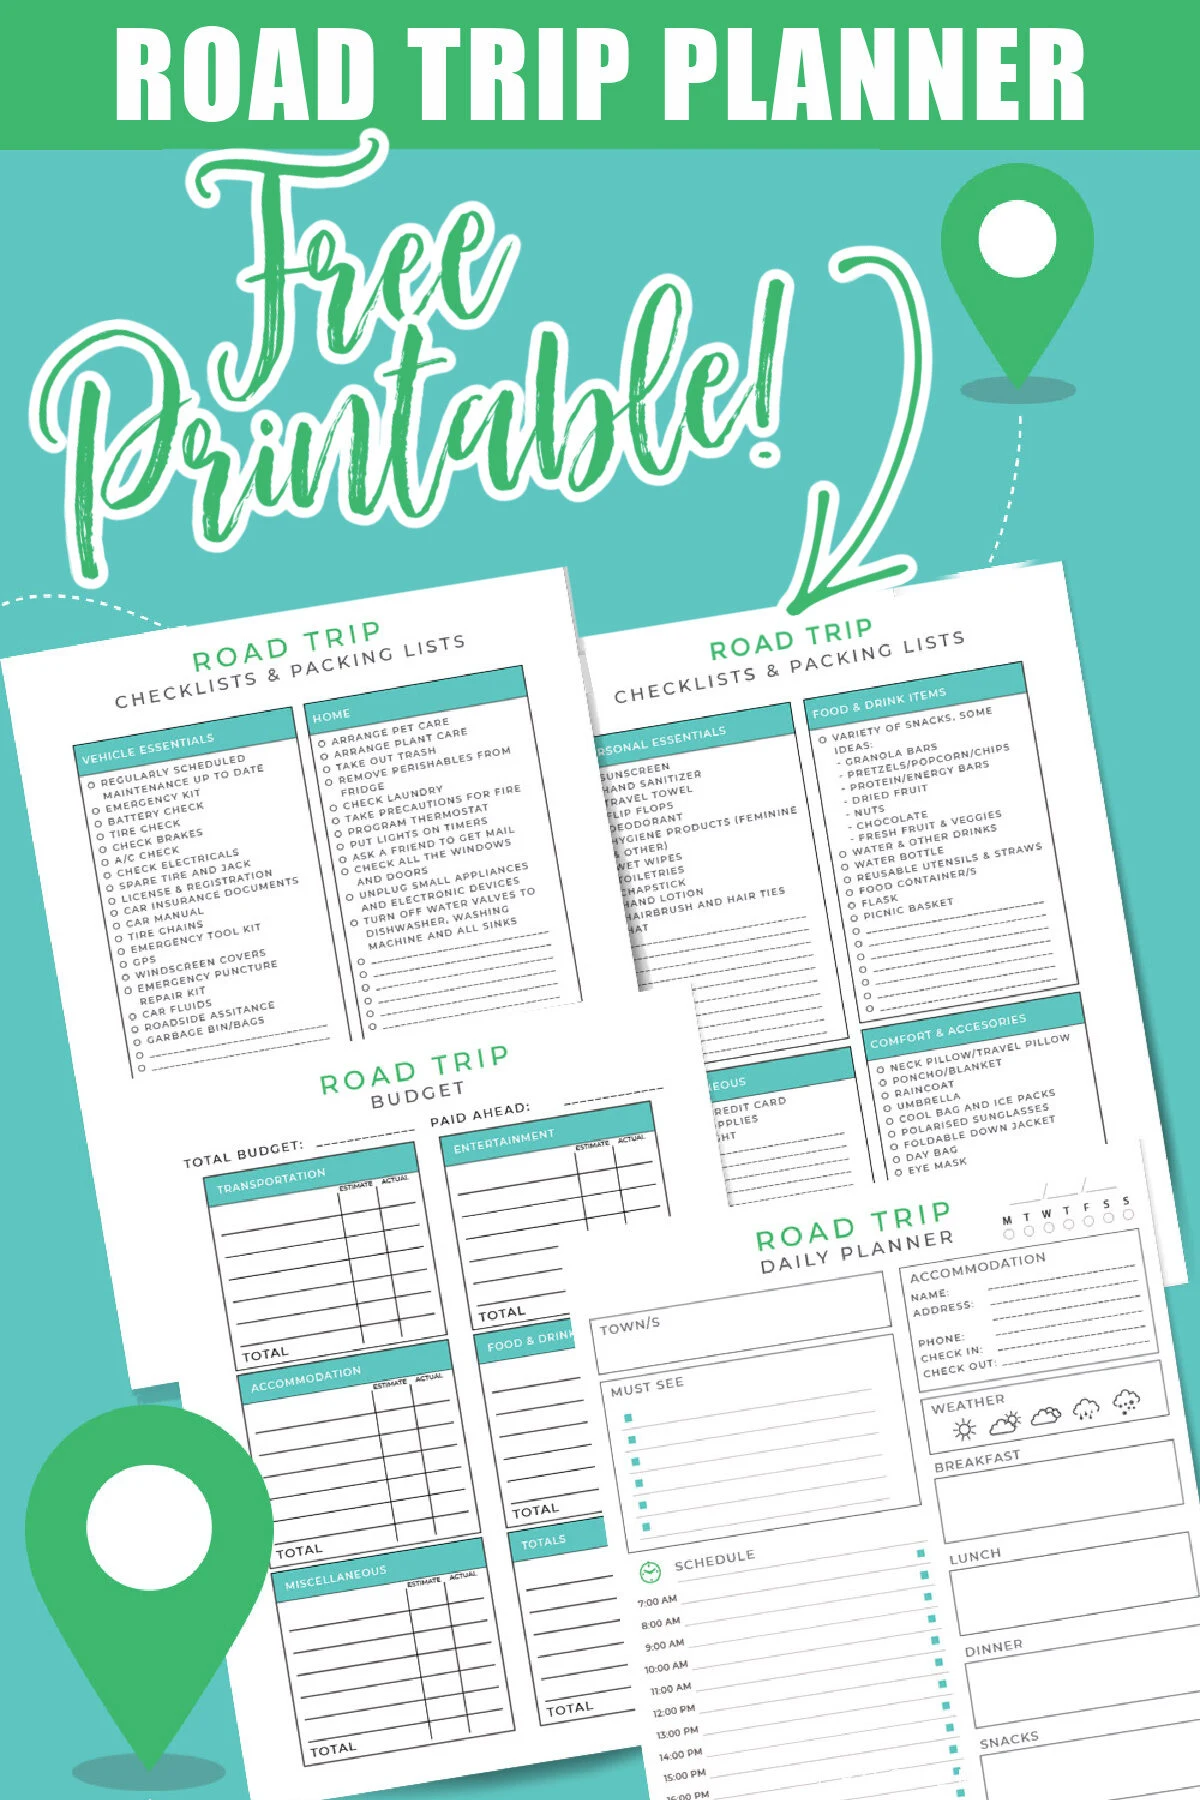 This free printable road trip planner will help you get organized. Keep track of your itinerary, packing lists, budget, and more.